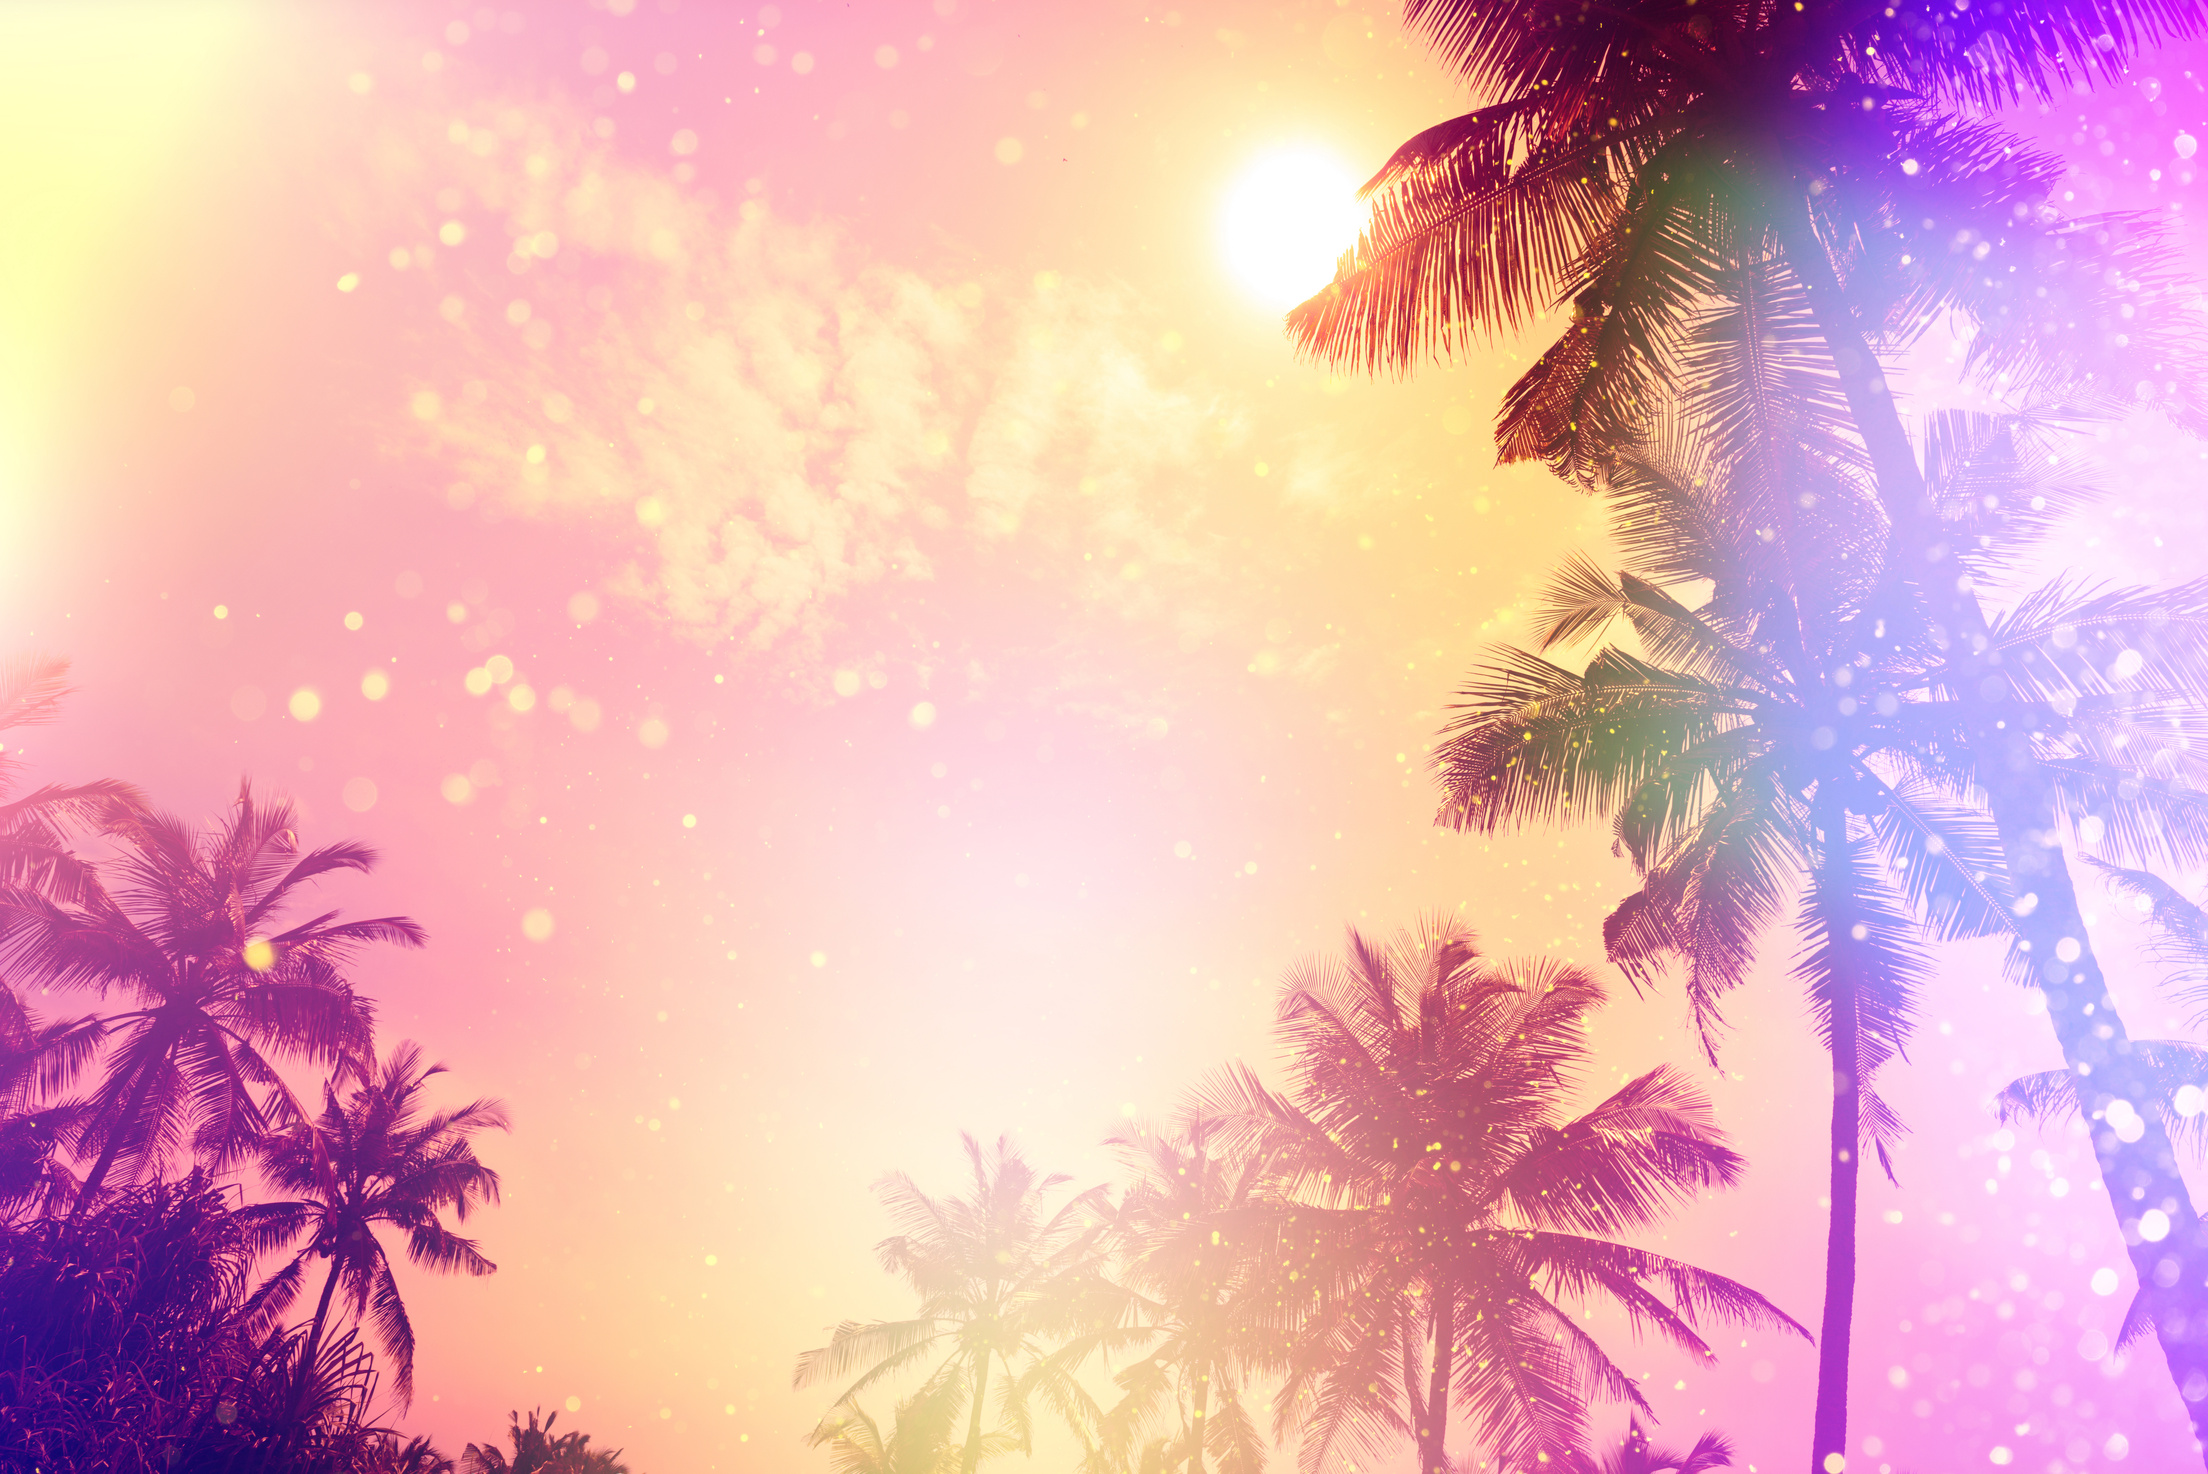 Palm sunset silhouettes tropical beach party fairytale stylized